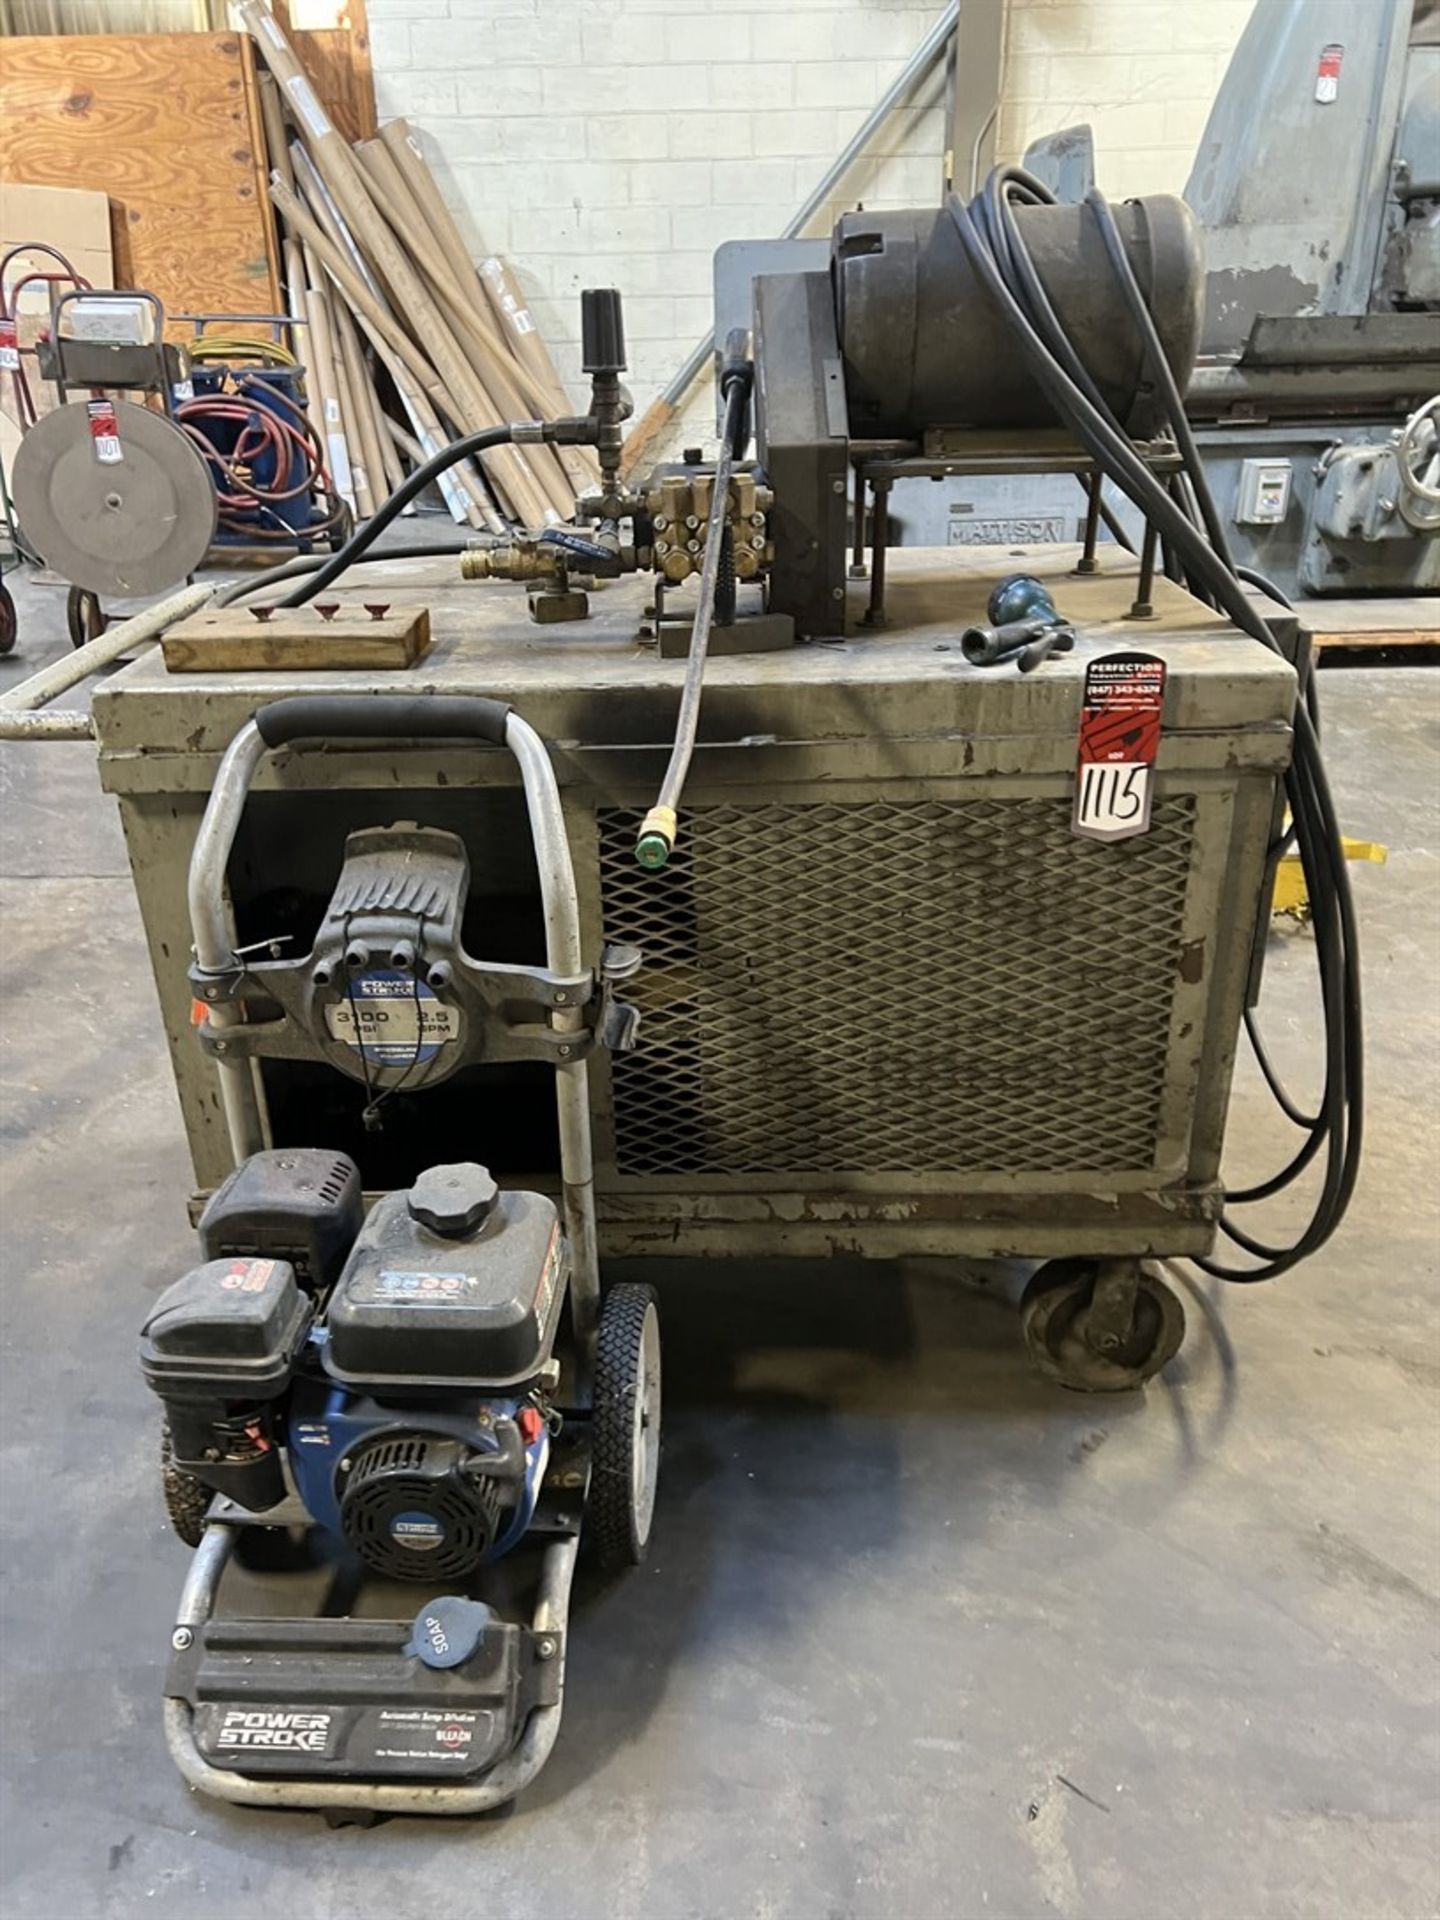 Lot Comprising Mobile Pressure Washer Cart w/ POWER STROKE 3100 PSI Pressure Washer (Machine Shop) - Image 2 of 6